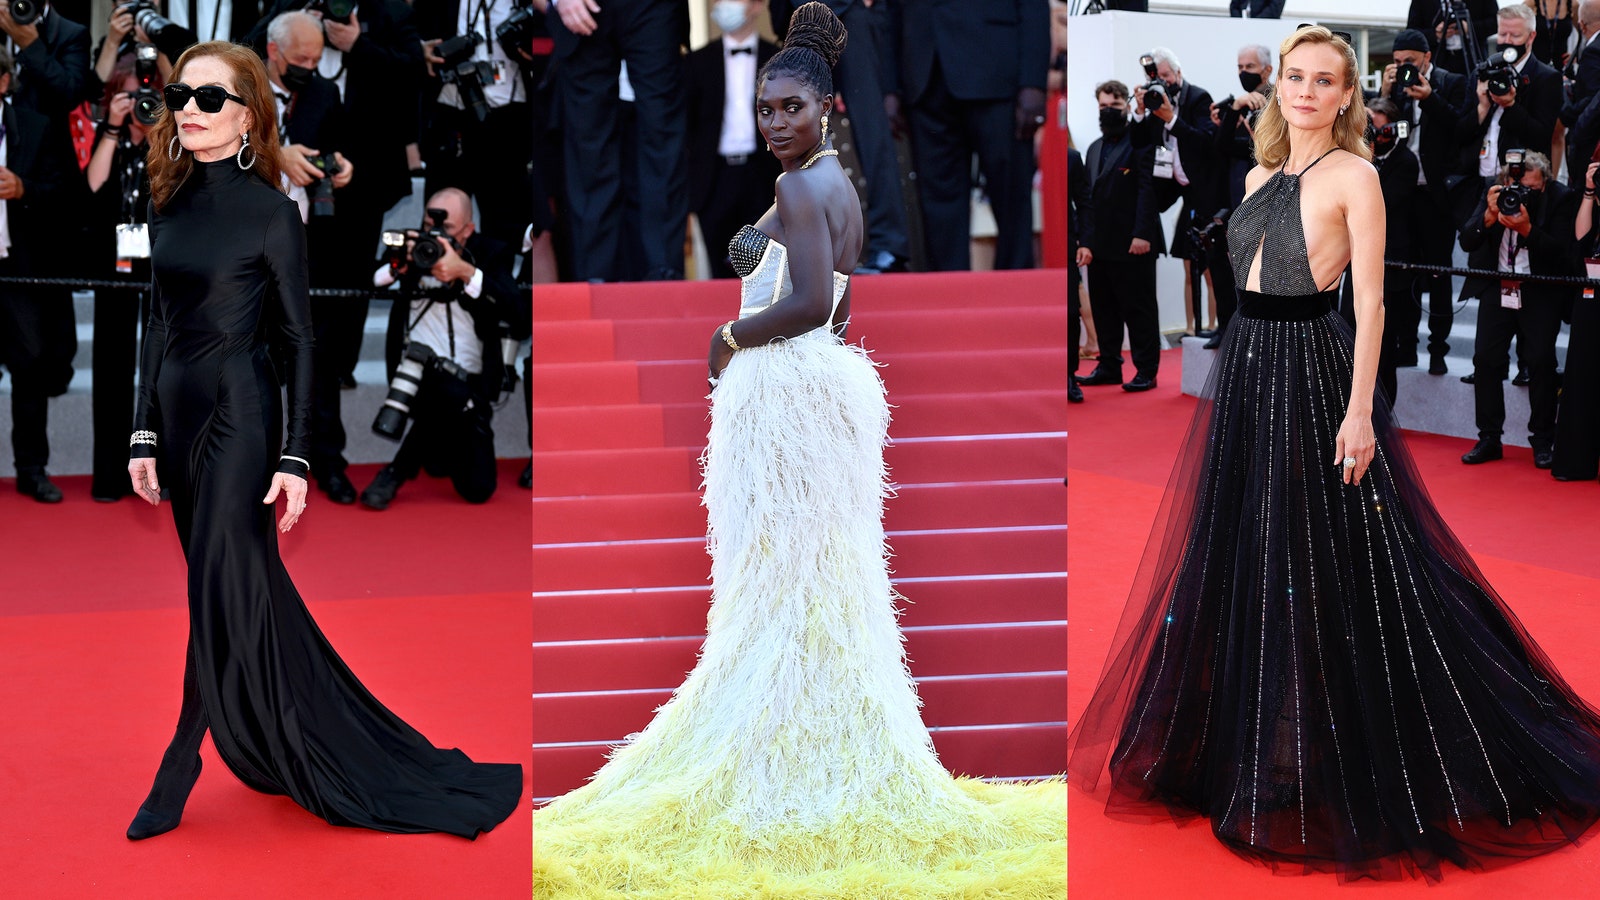 All the Best Fashion from the 2021 Cannes Film Festival